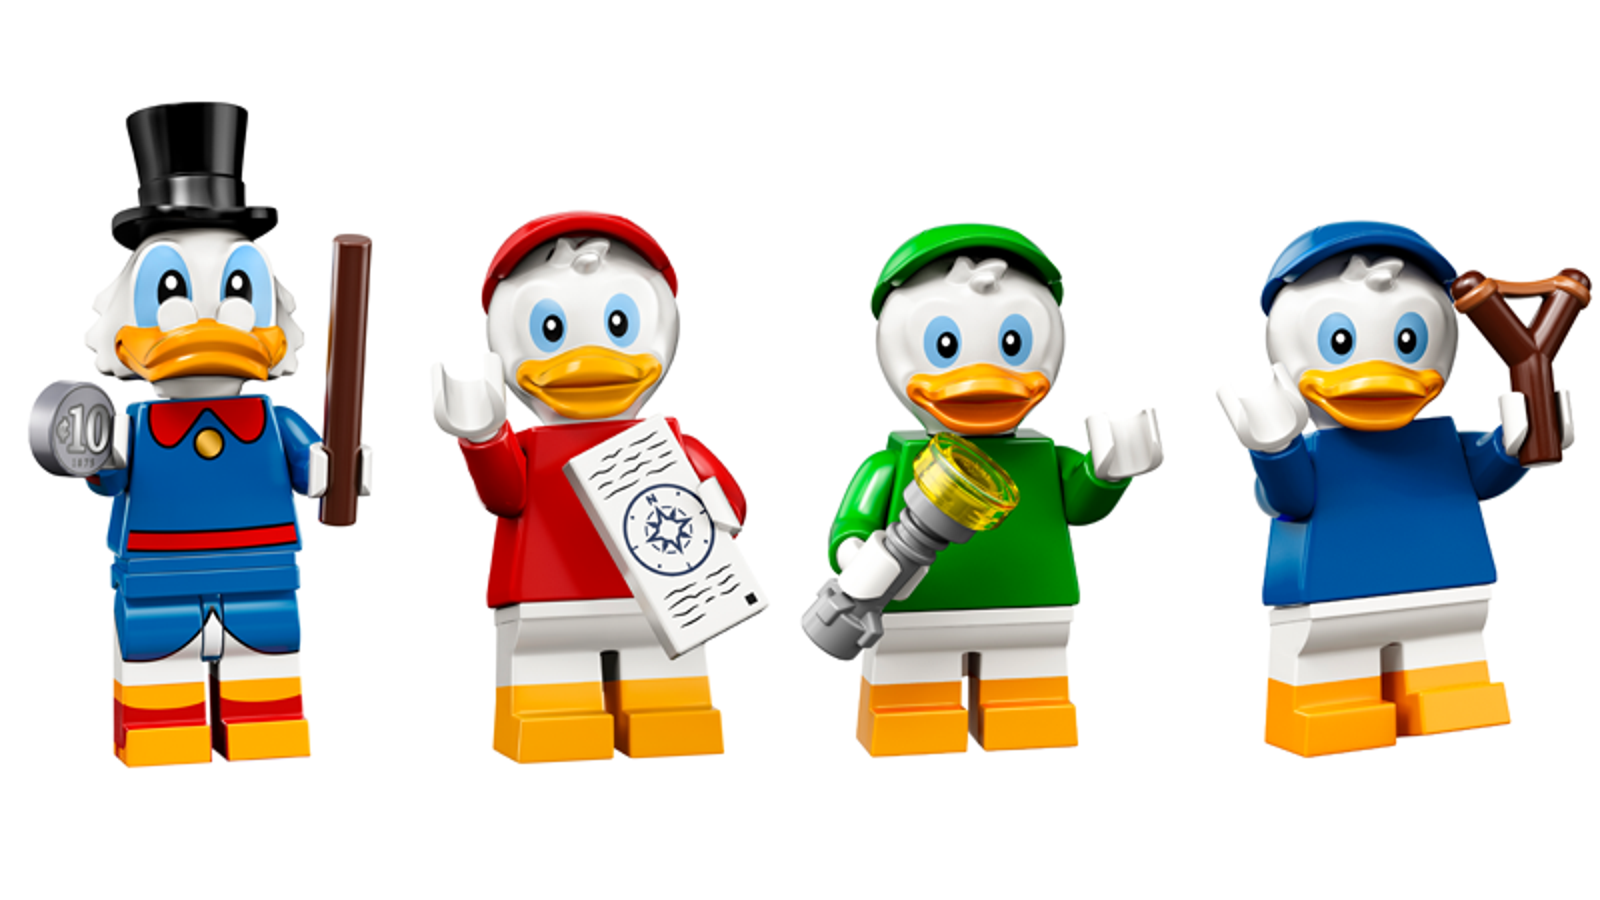 The Next Wave of Lego Minifigures is Classic Disney Themed